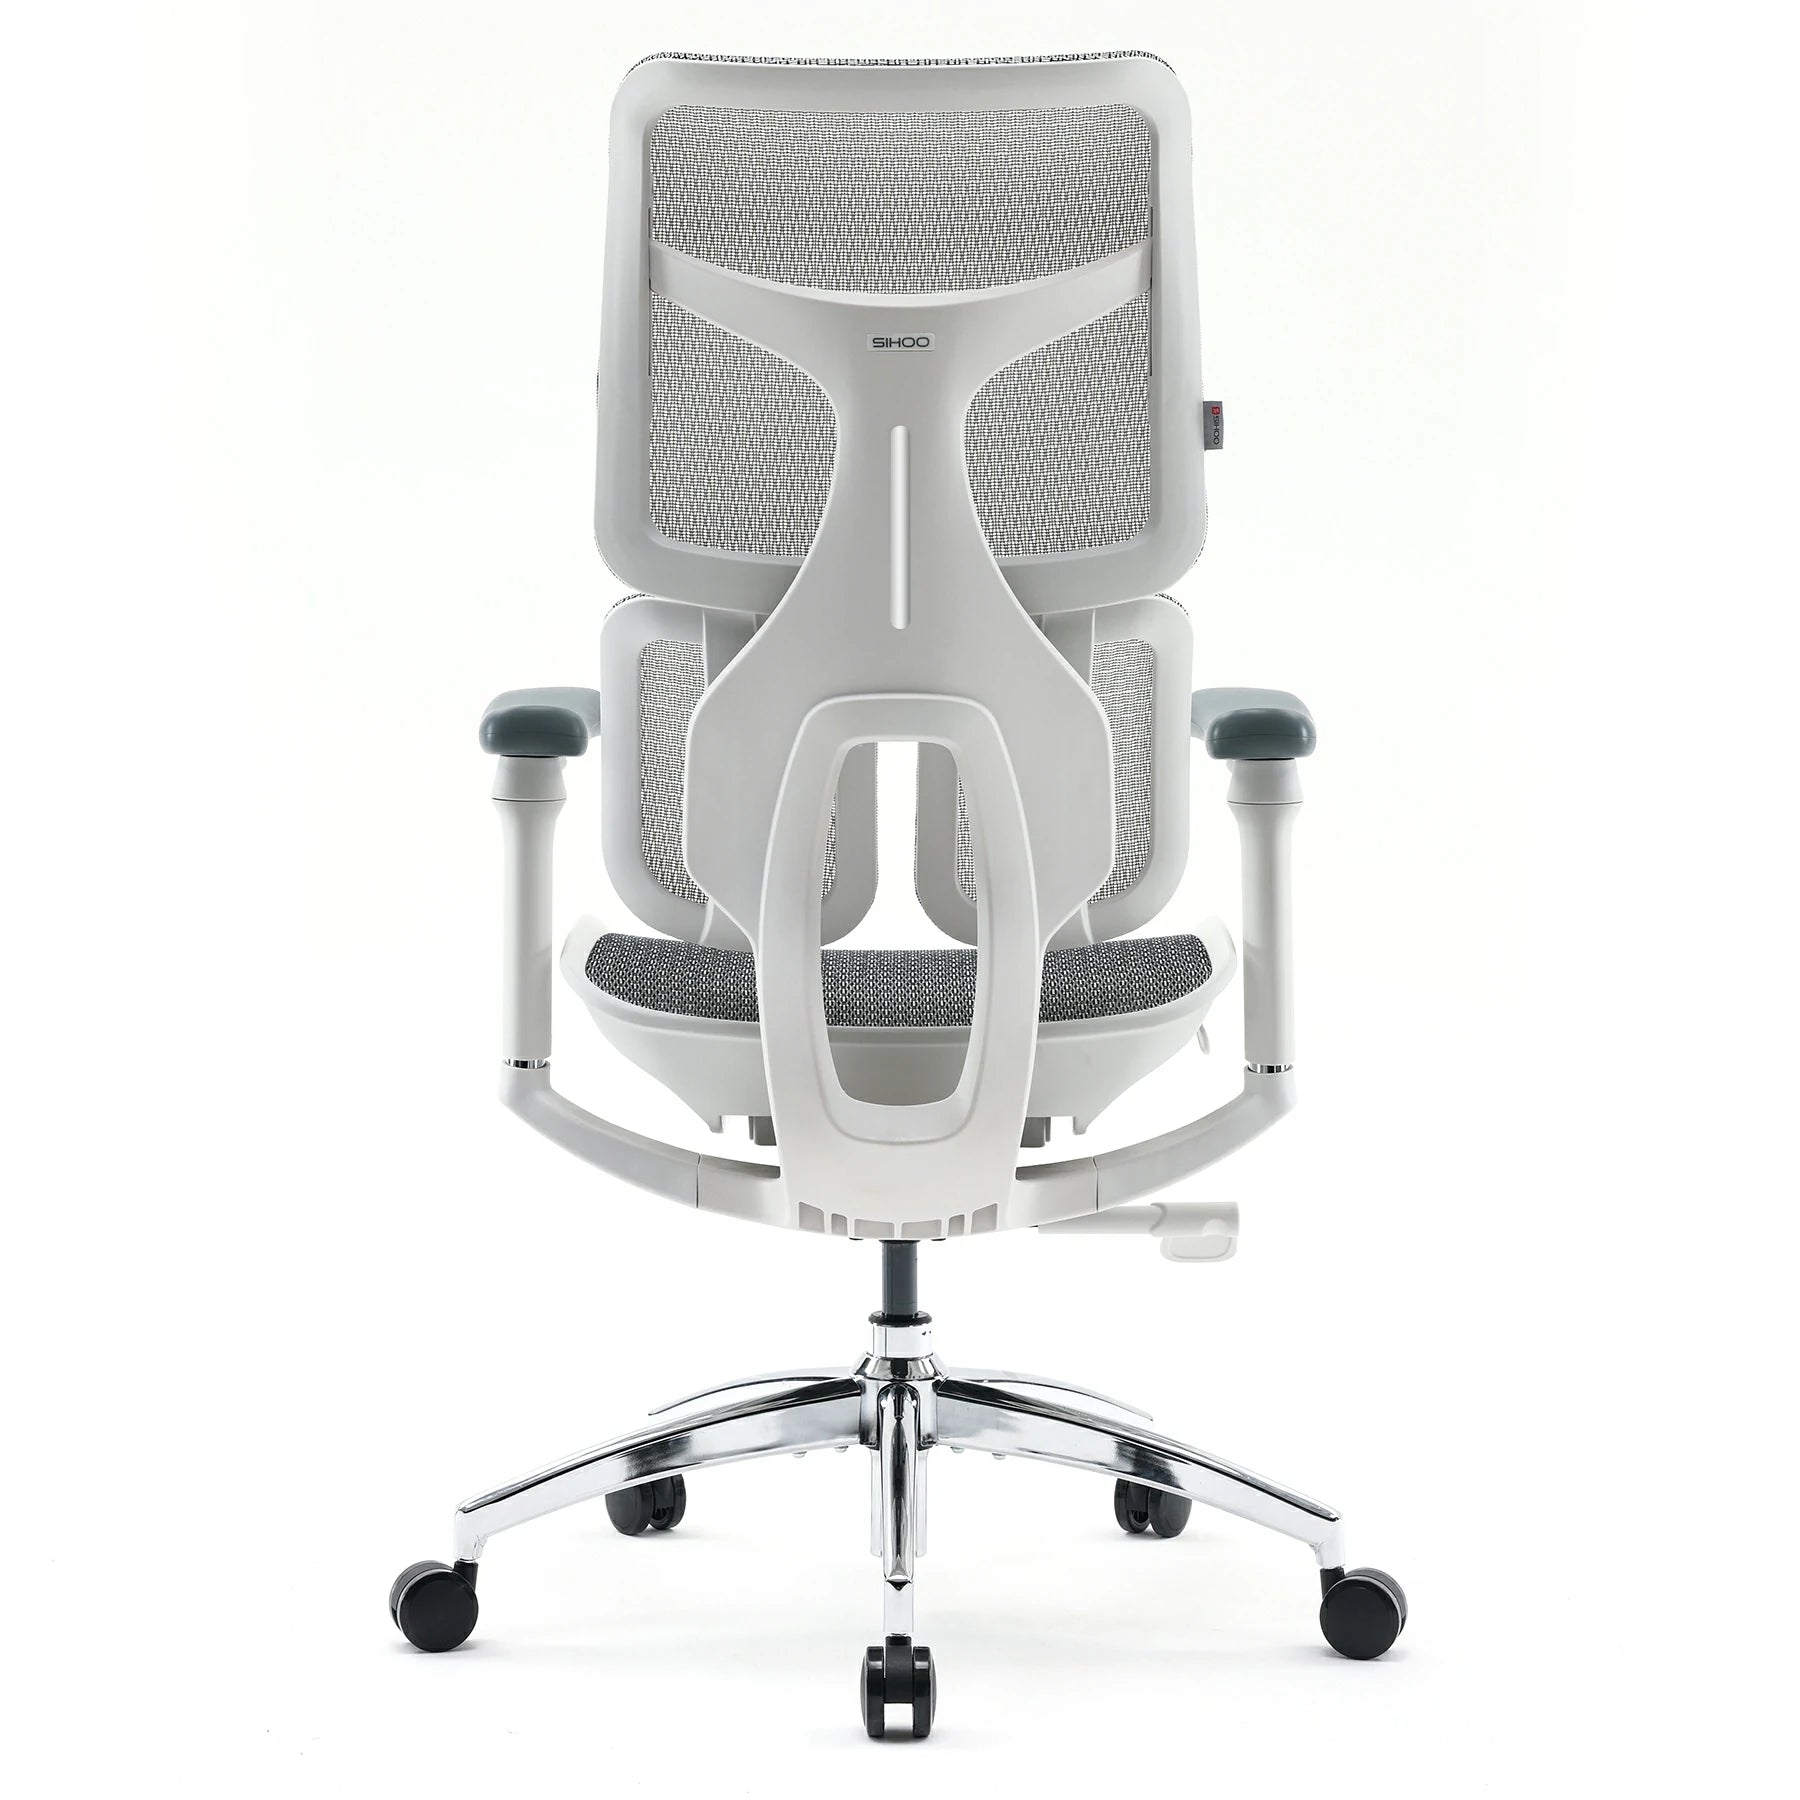 (NEW) Sihoo Doro S100 Ergonomic Office Chair with Double Dynamic Lumbar Support